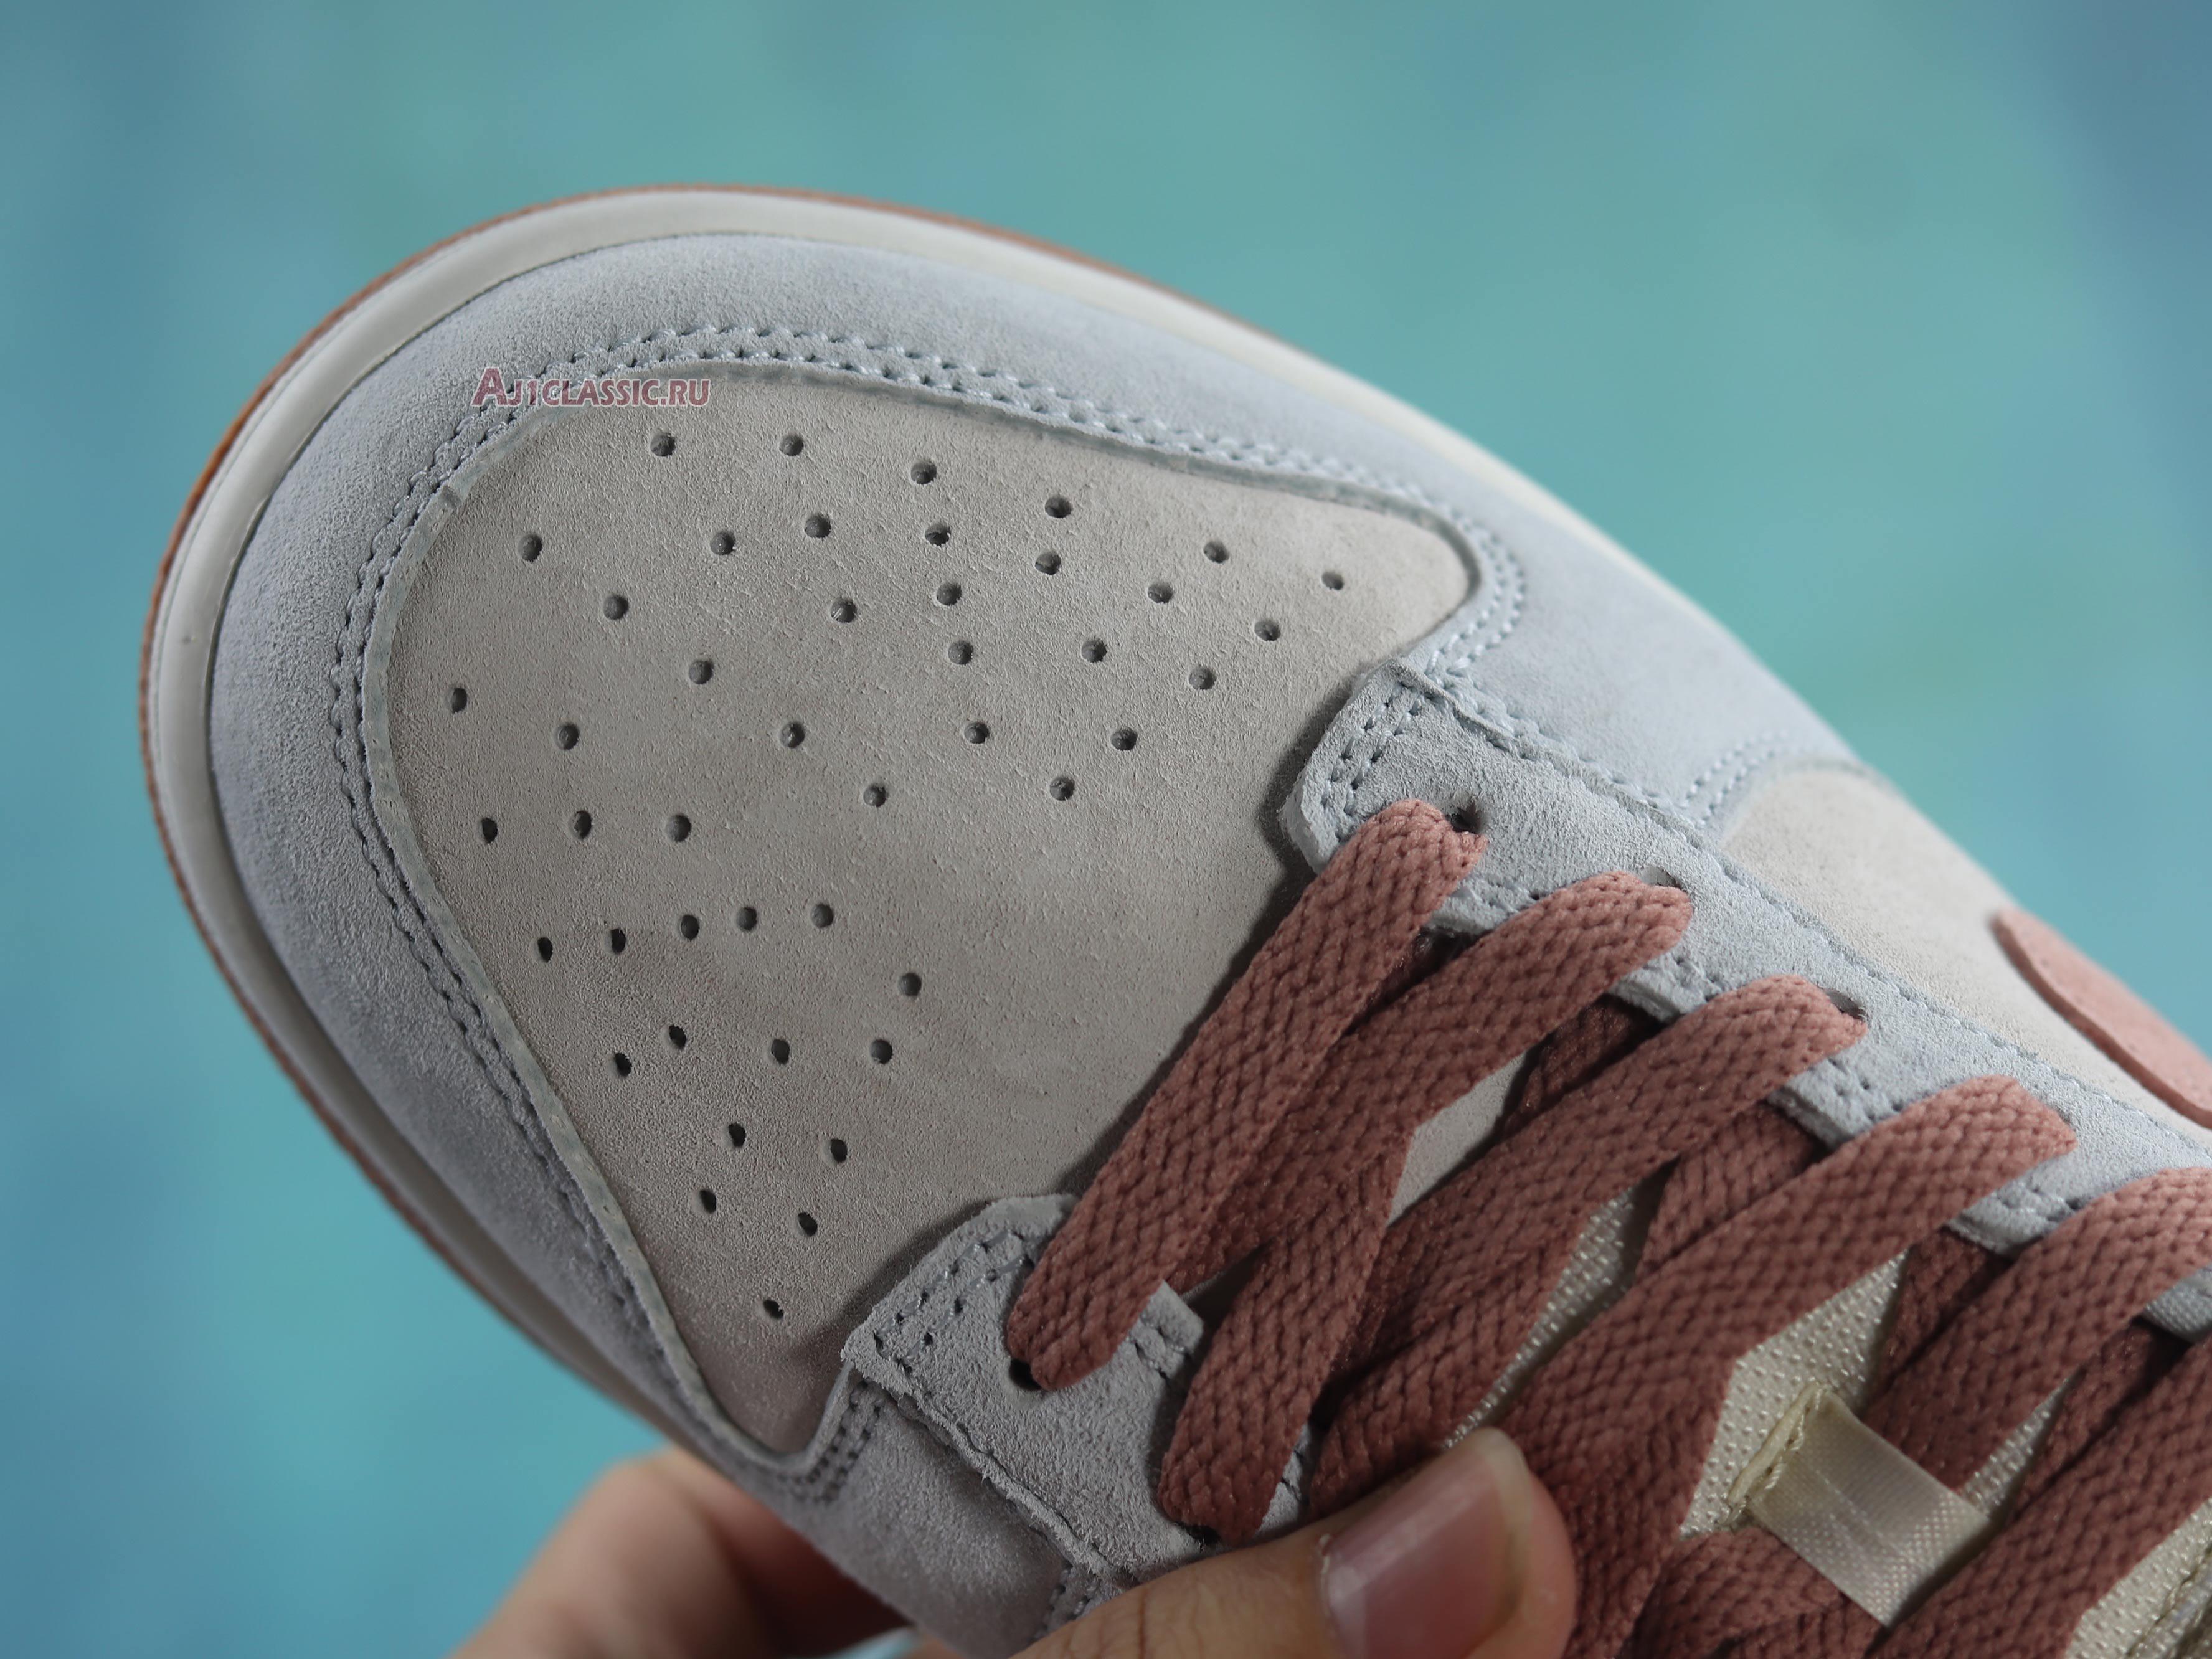 Nike Dunk Low "Fossil Rose" DH7577-001